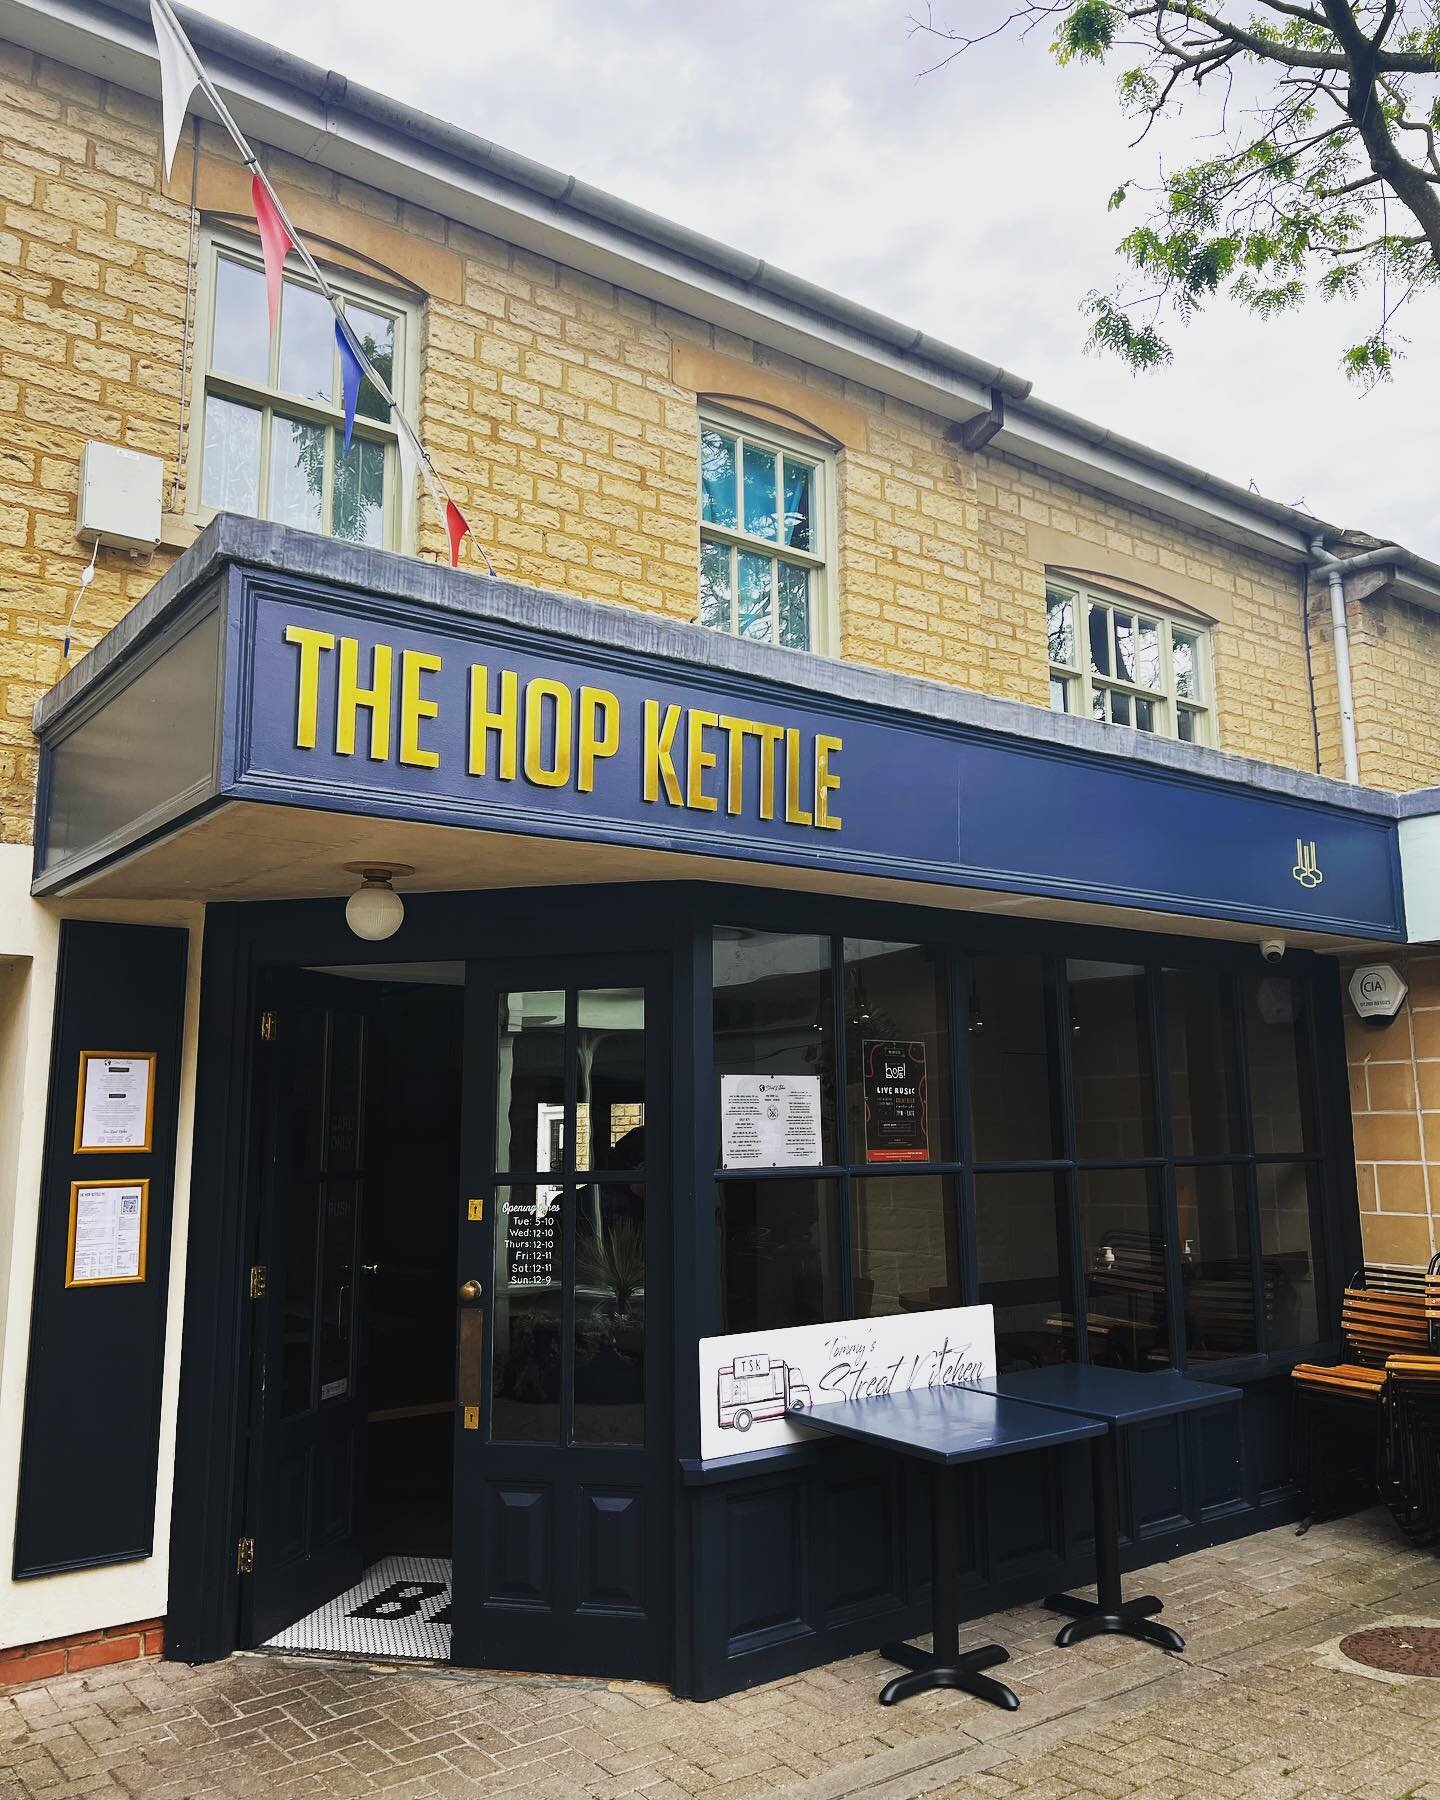 Come enjoy some great beer, food and company down at The Hop Kettle. Plenty of outside seating to enjoy the weather this weekend! 🍺☀️🌭 #cirencester #cotswolds